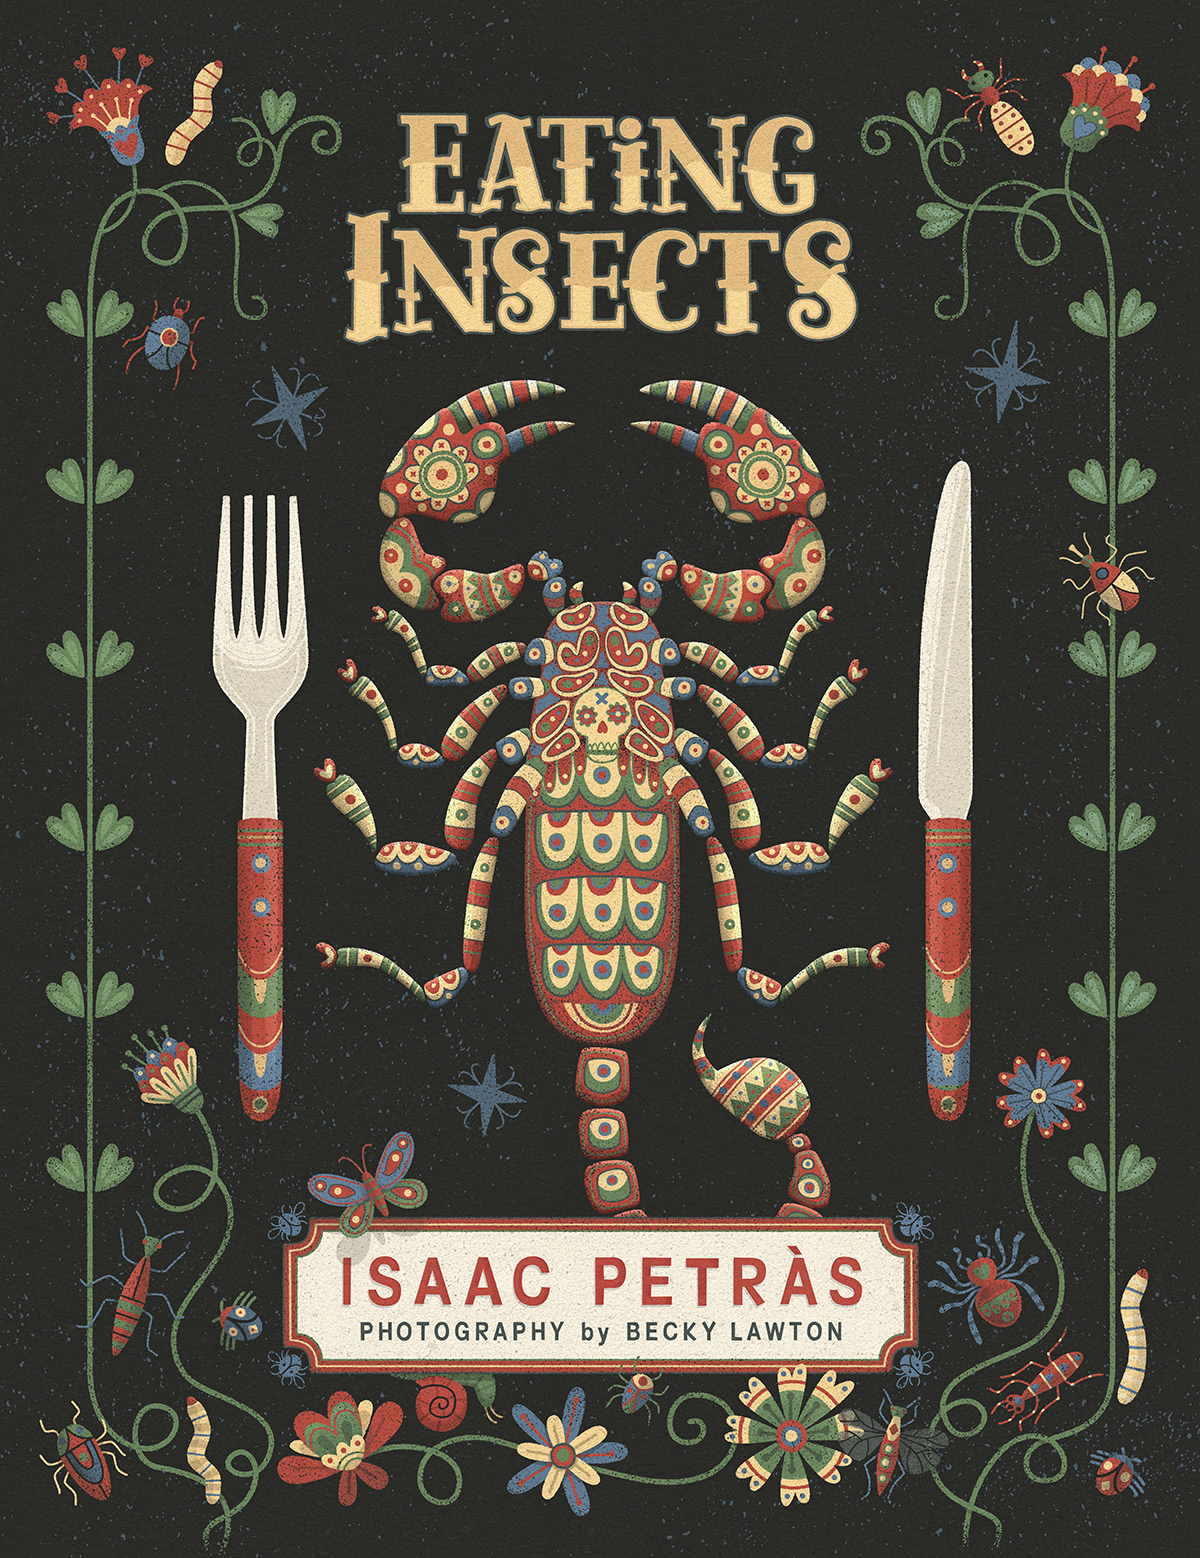 Insects Eating  bugs spiders book cover illustrated HAND LETTERING folk art Food  scorpion